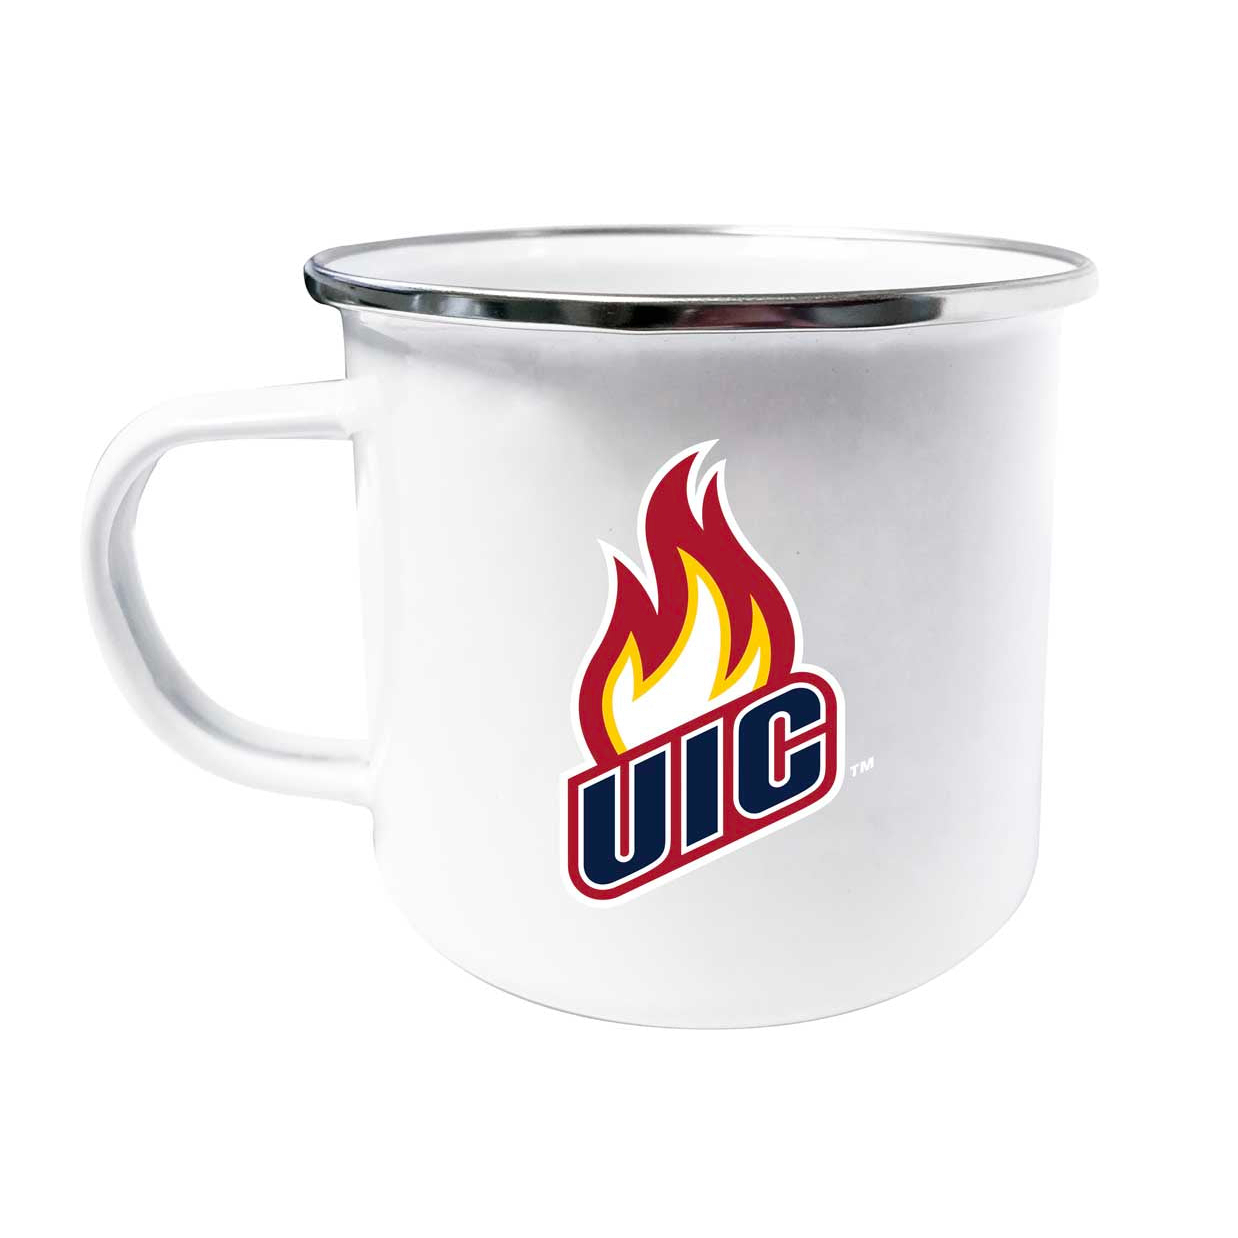 University Of Illinois At Chicago Tin Camper Coffee Mug - Choose Your Color - White